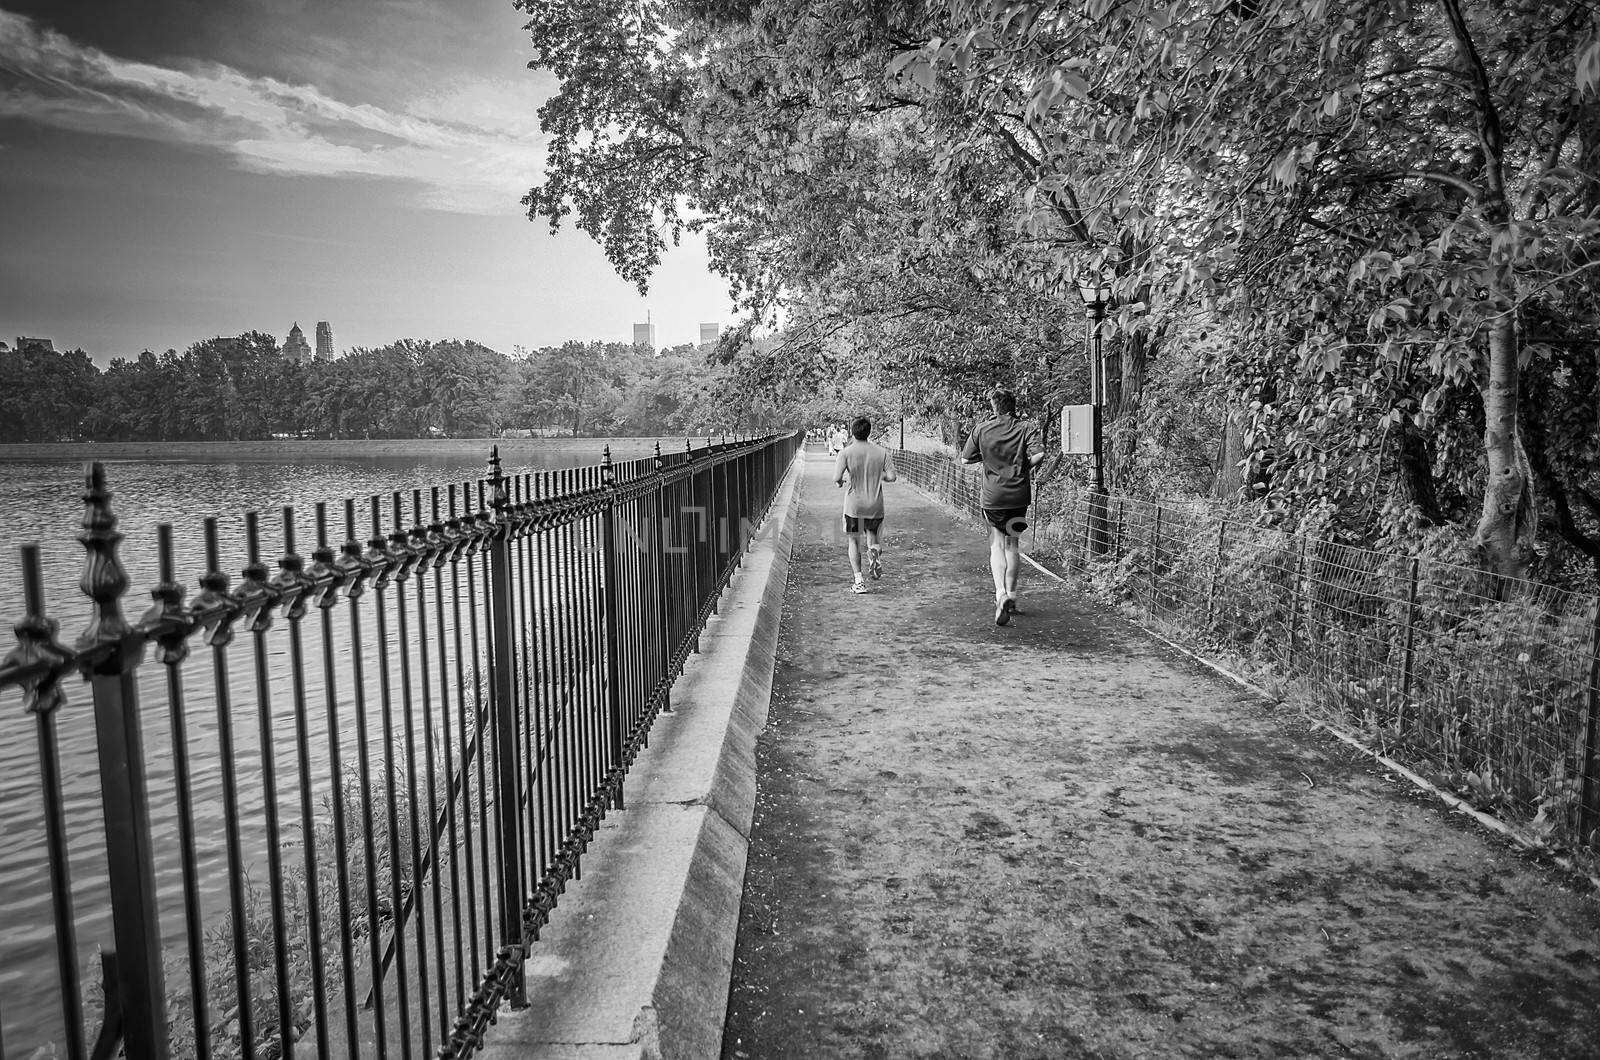 Jogging in Central Park, New York by marcorubino